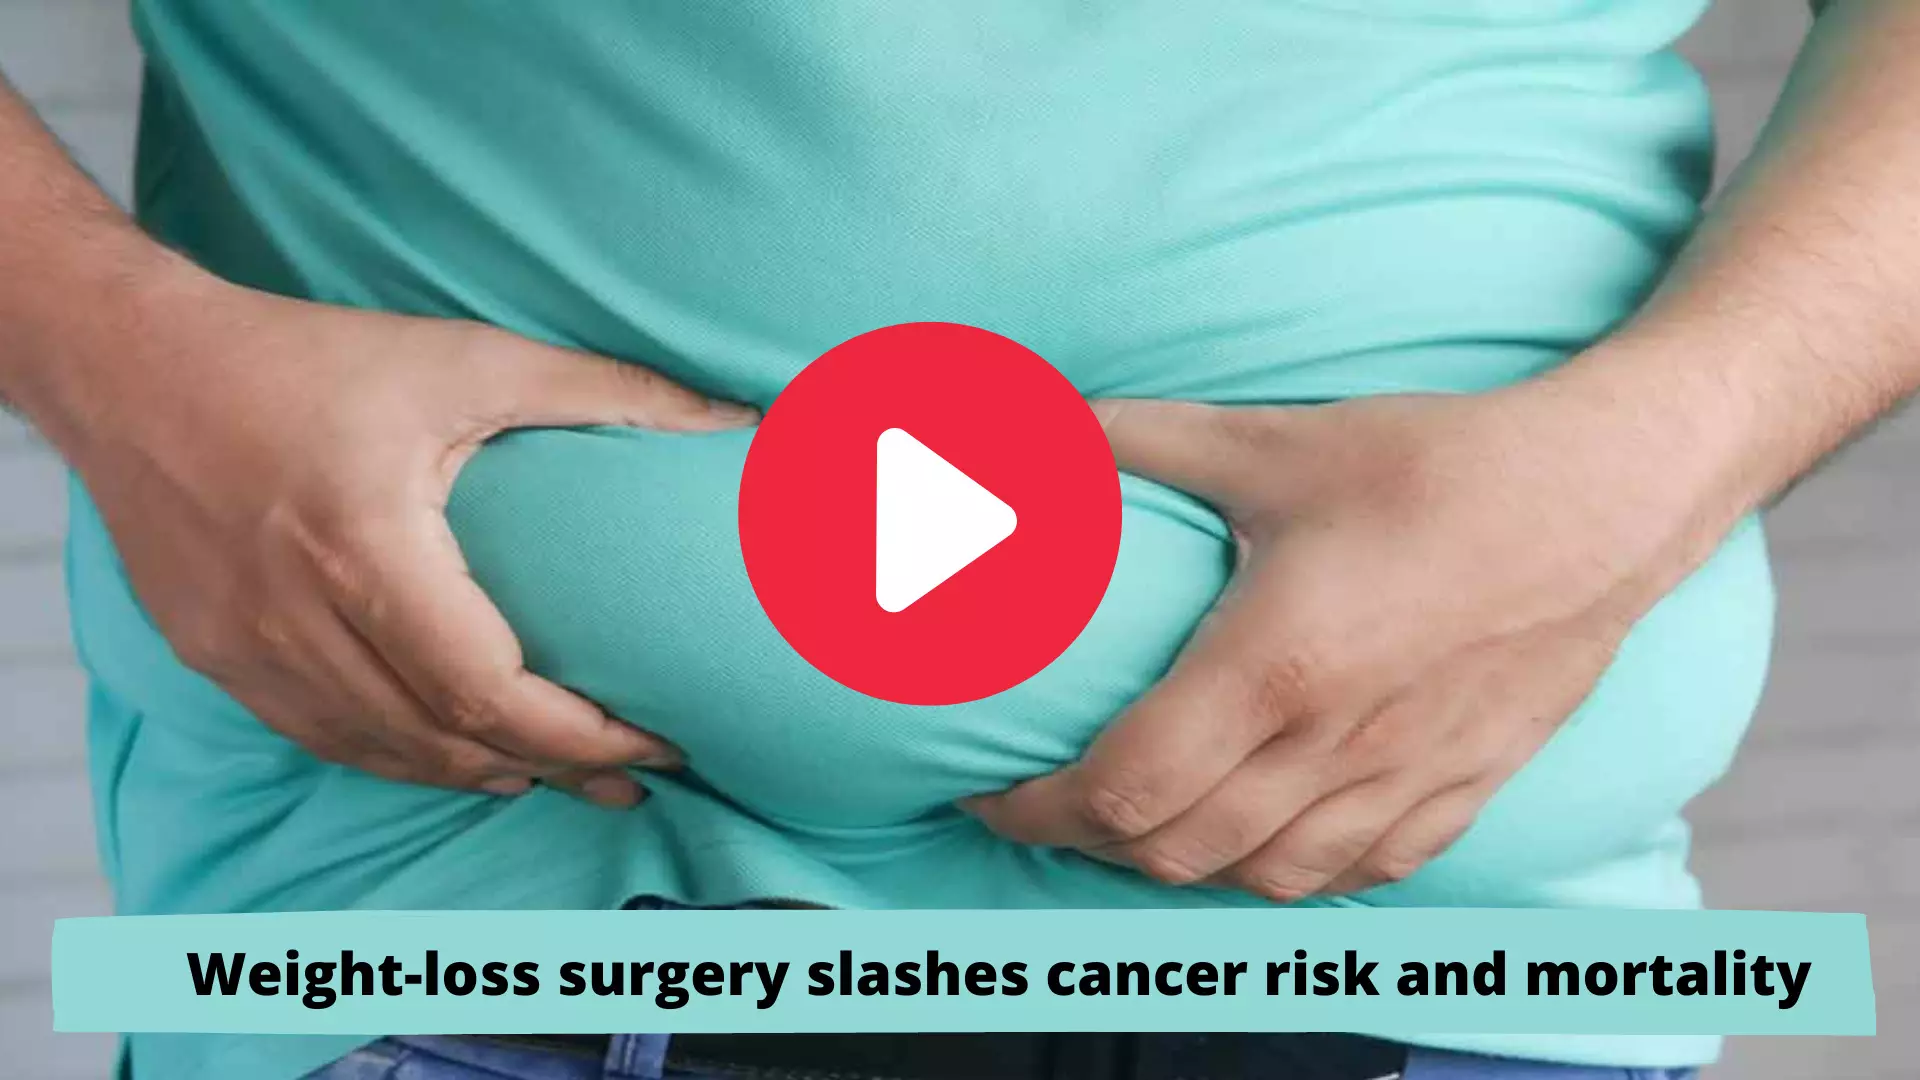 Weight-loss surgery slashes cancer risk and mortality